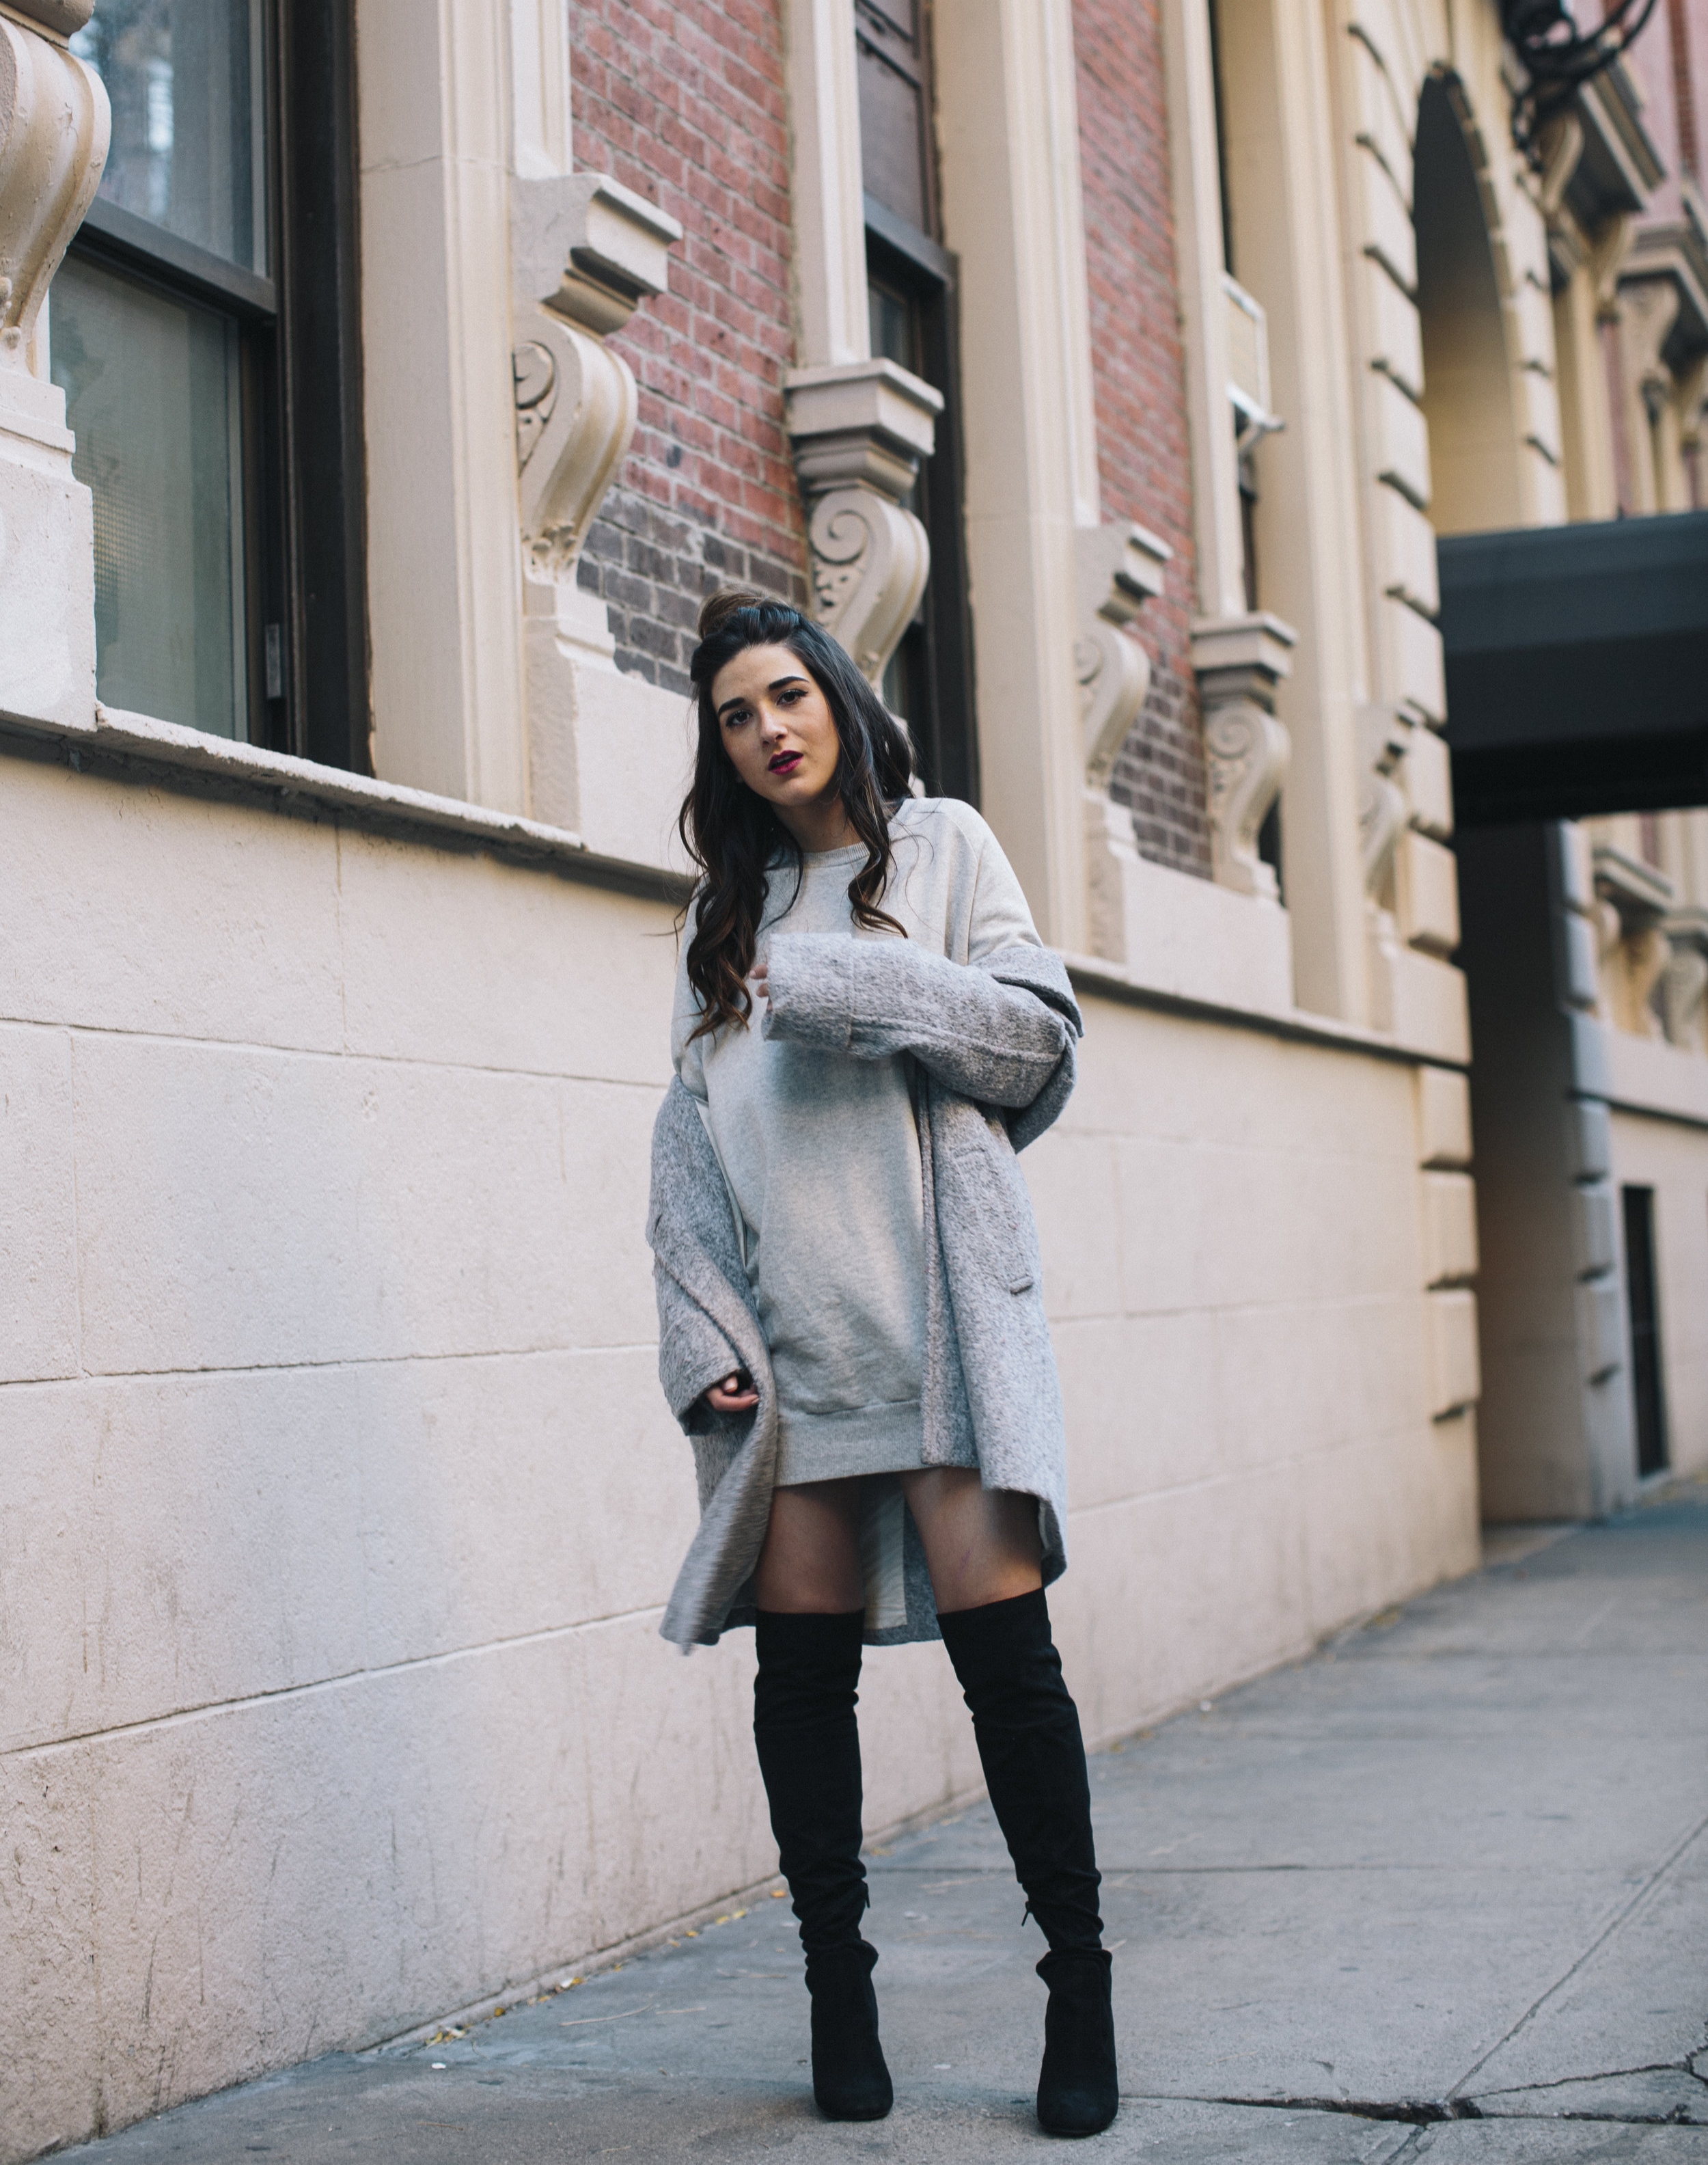 All Grey Look OTK Boots Why I Hate Fashion Week Esther Santer Fashion Blog Louboutins & Love NYC Street Style Blogger Outfit OOTD Trendy Sweatshirt Dress Topknot Coat Women Girl Shoes Shopping Zara Beauty Accessories Monochome Wear Clothes Winter Look.jpg